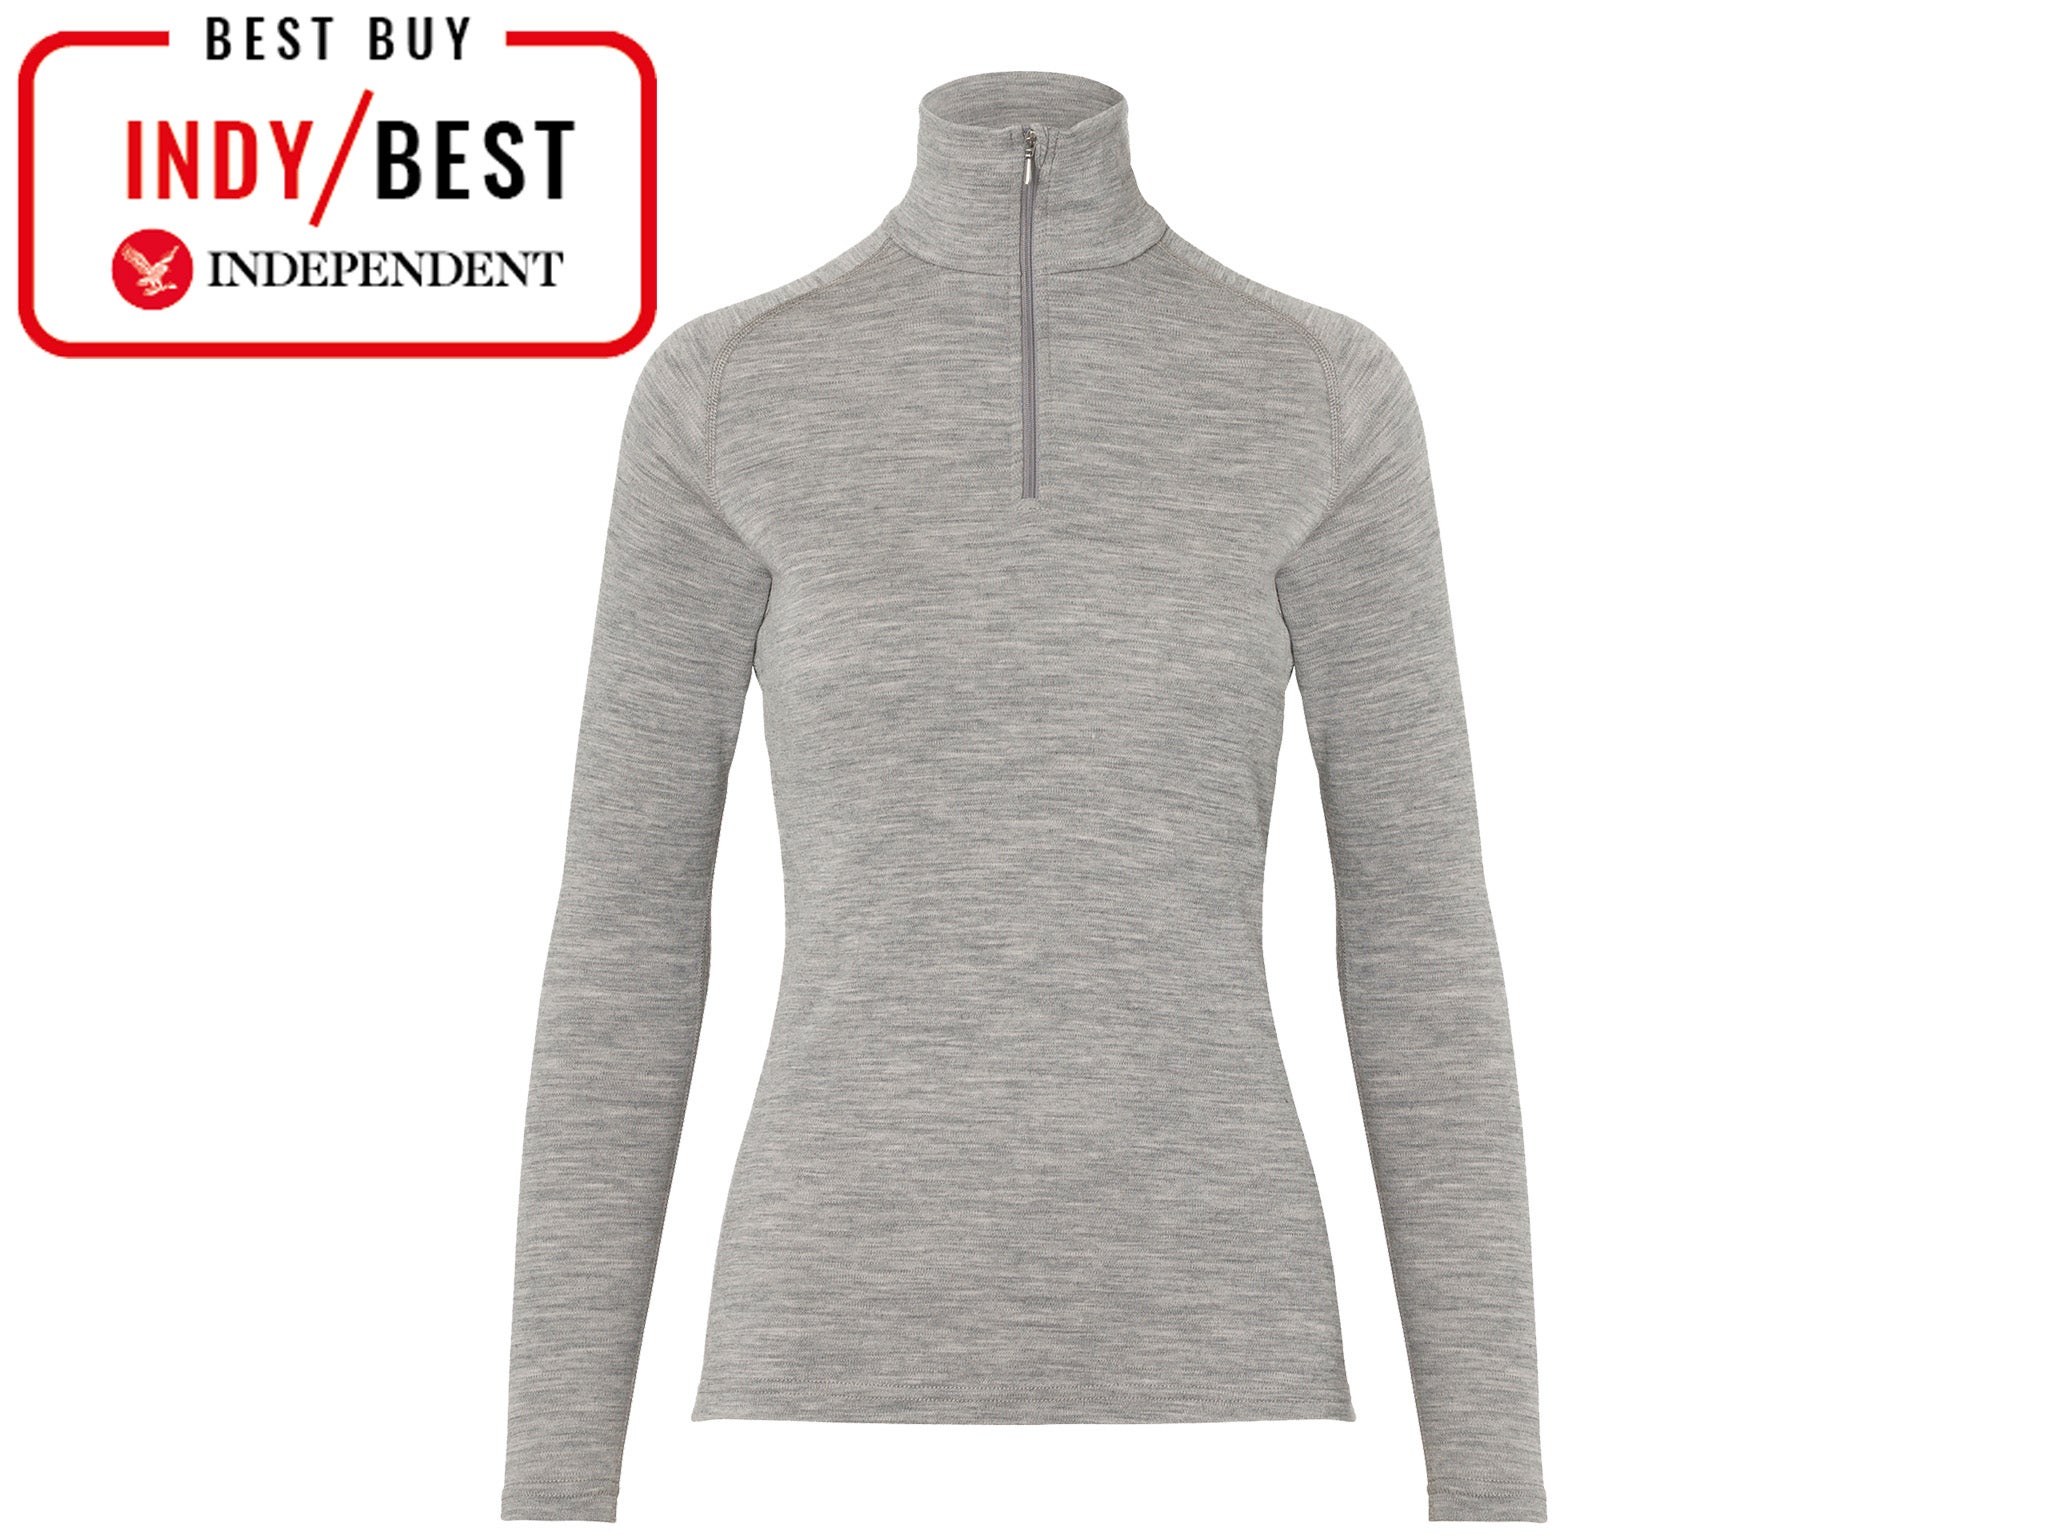 66north-Indybest-baselayer-review